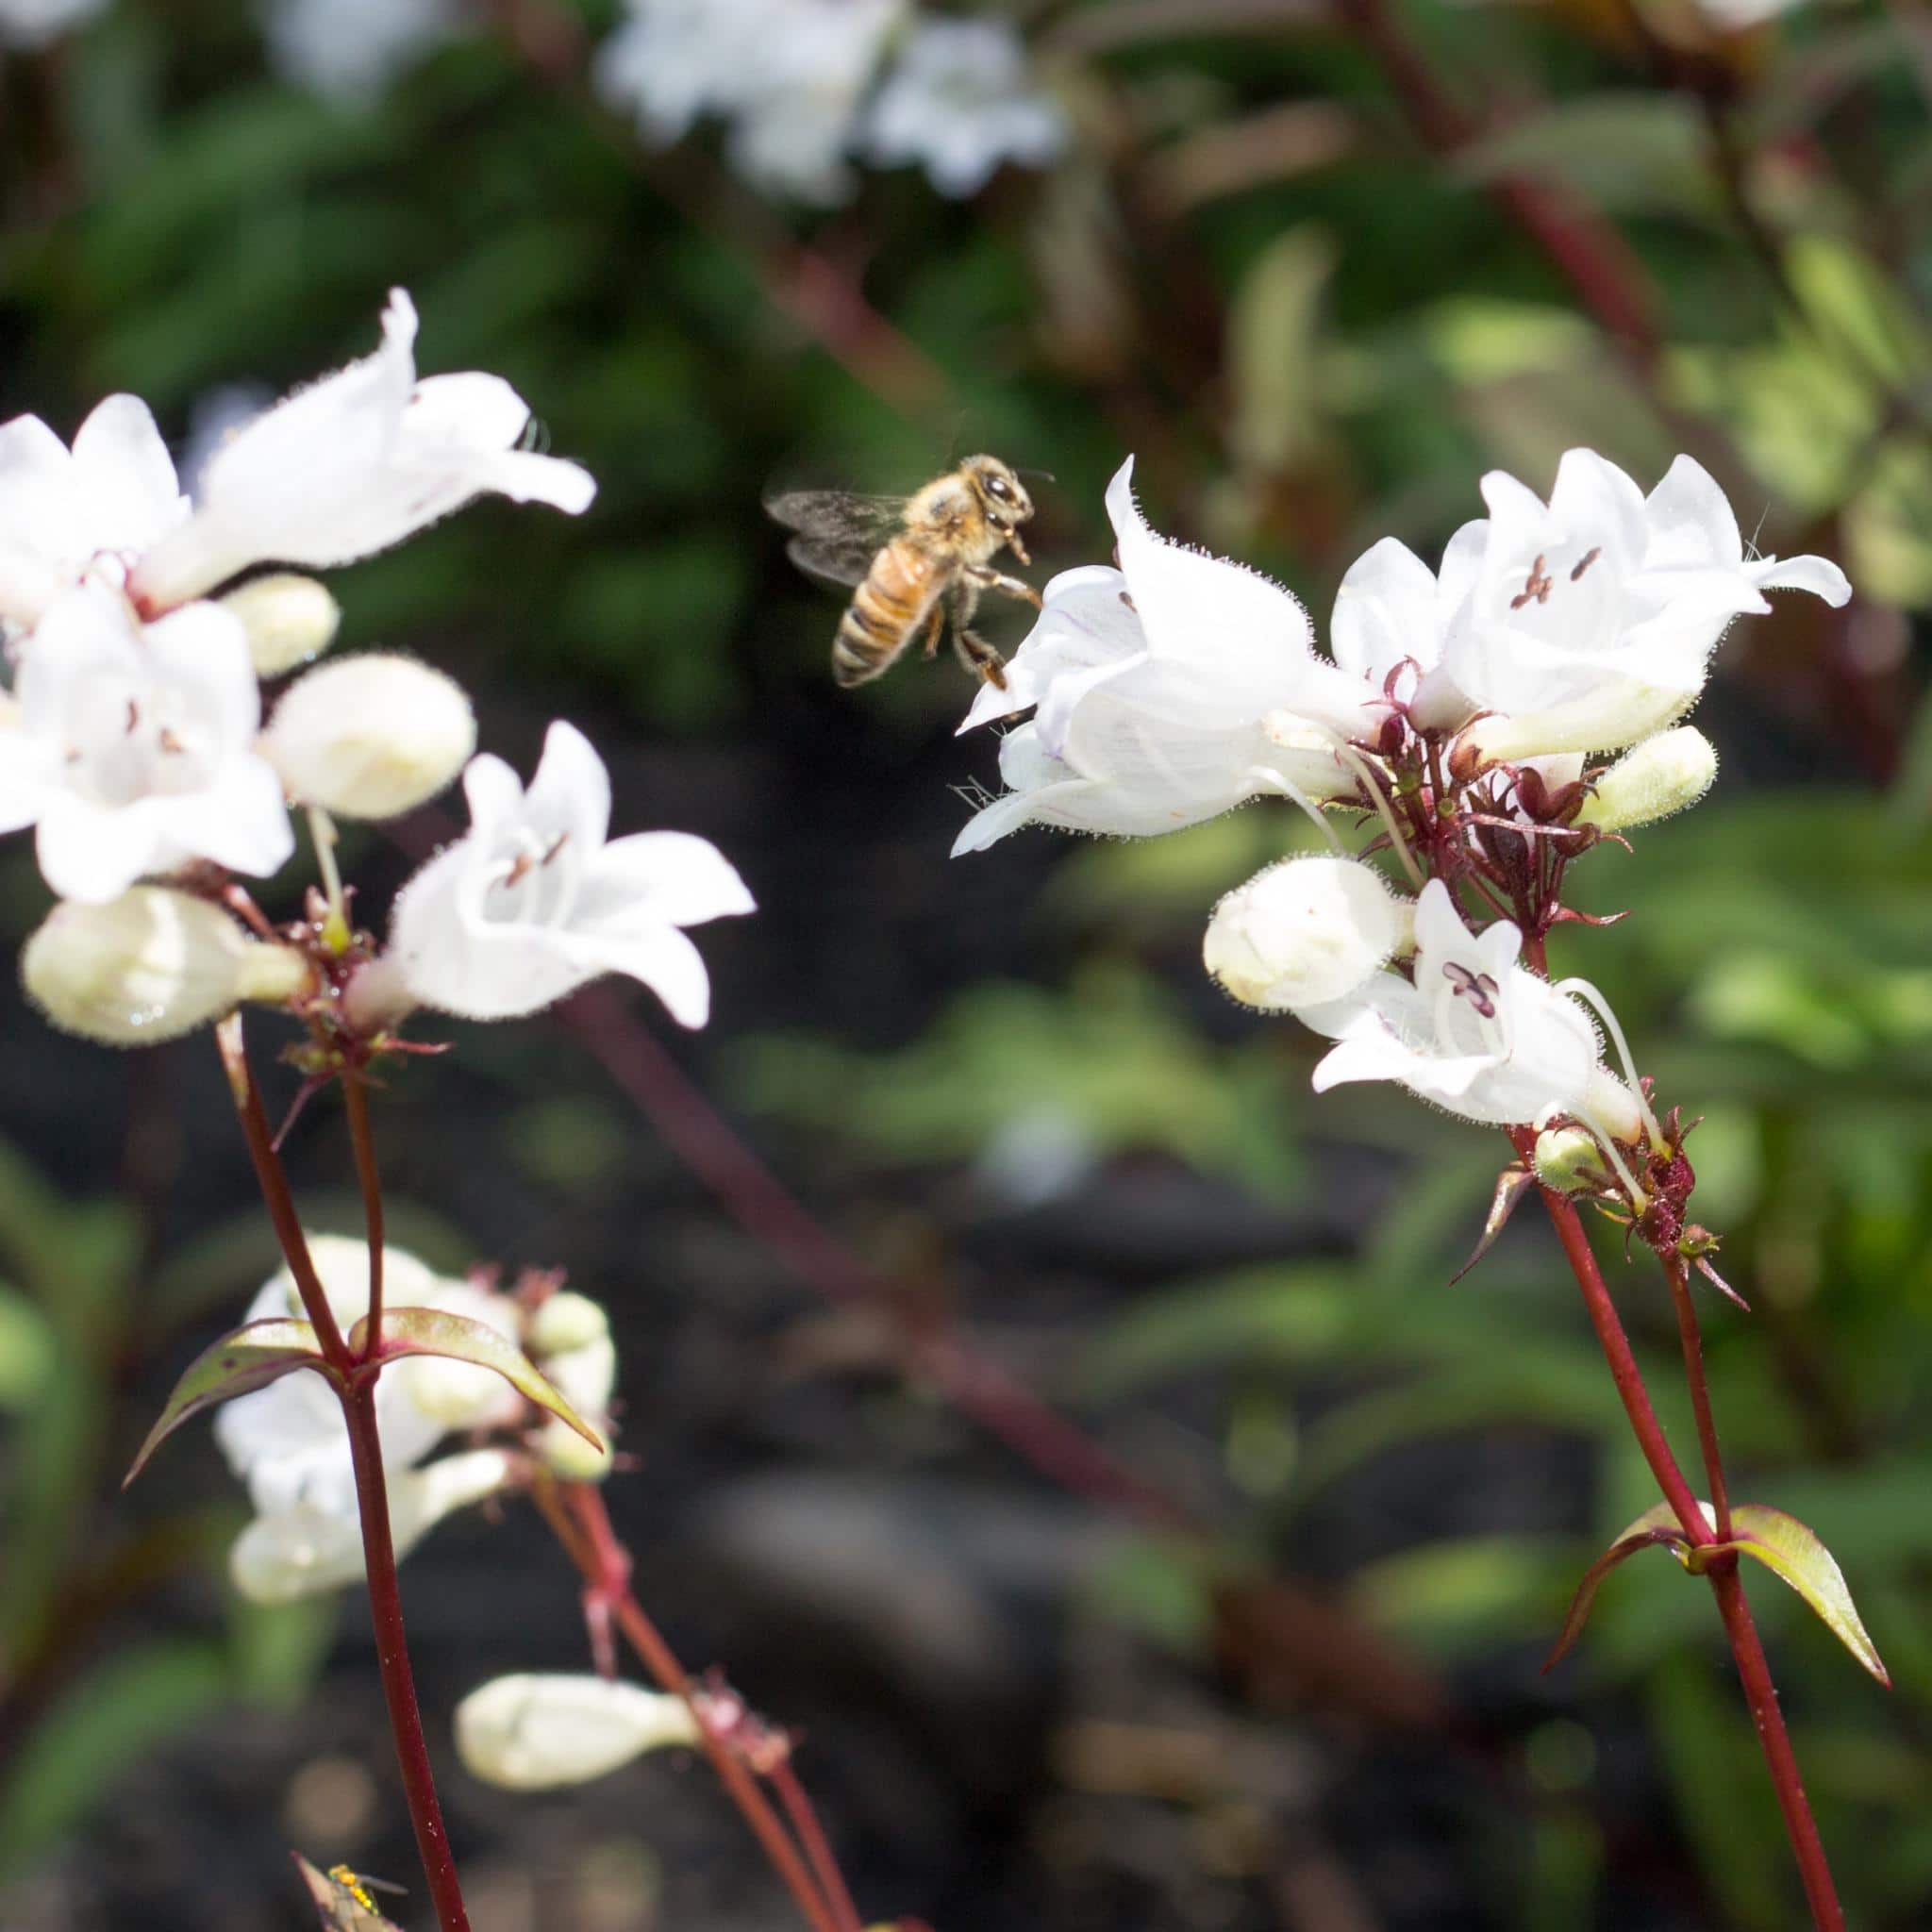 a honeybee hovers over a white flower